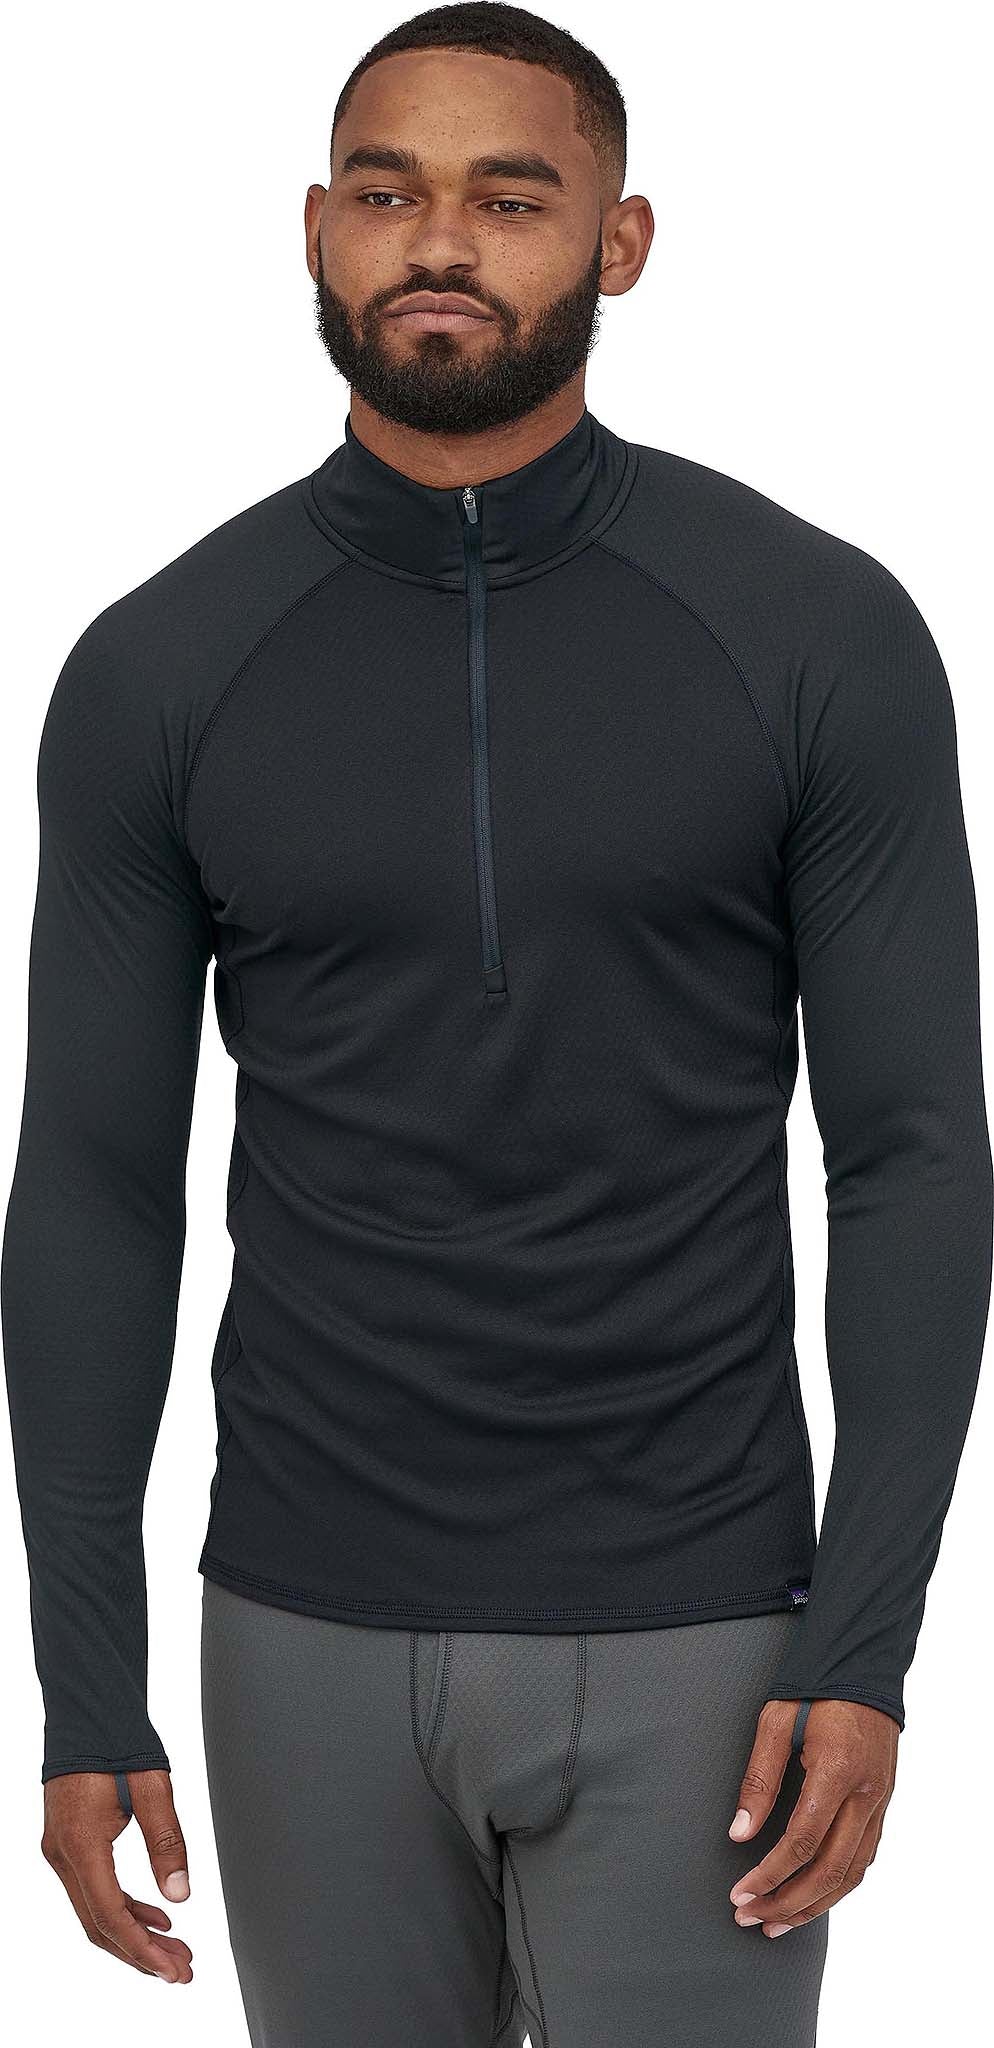 Men's Regular Fit Long Sleeve Midweight Thermal Undershirt - All In Motion™  Black S